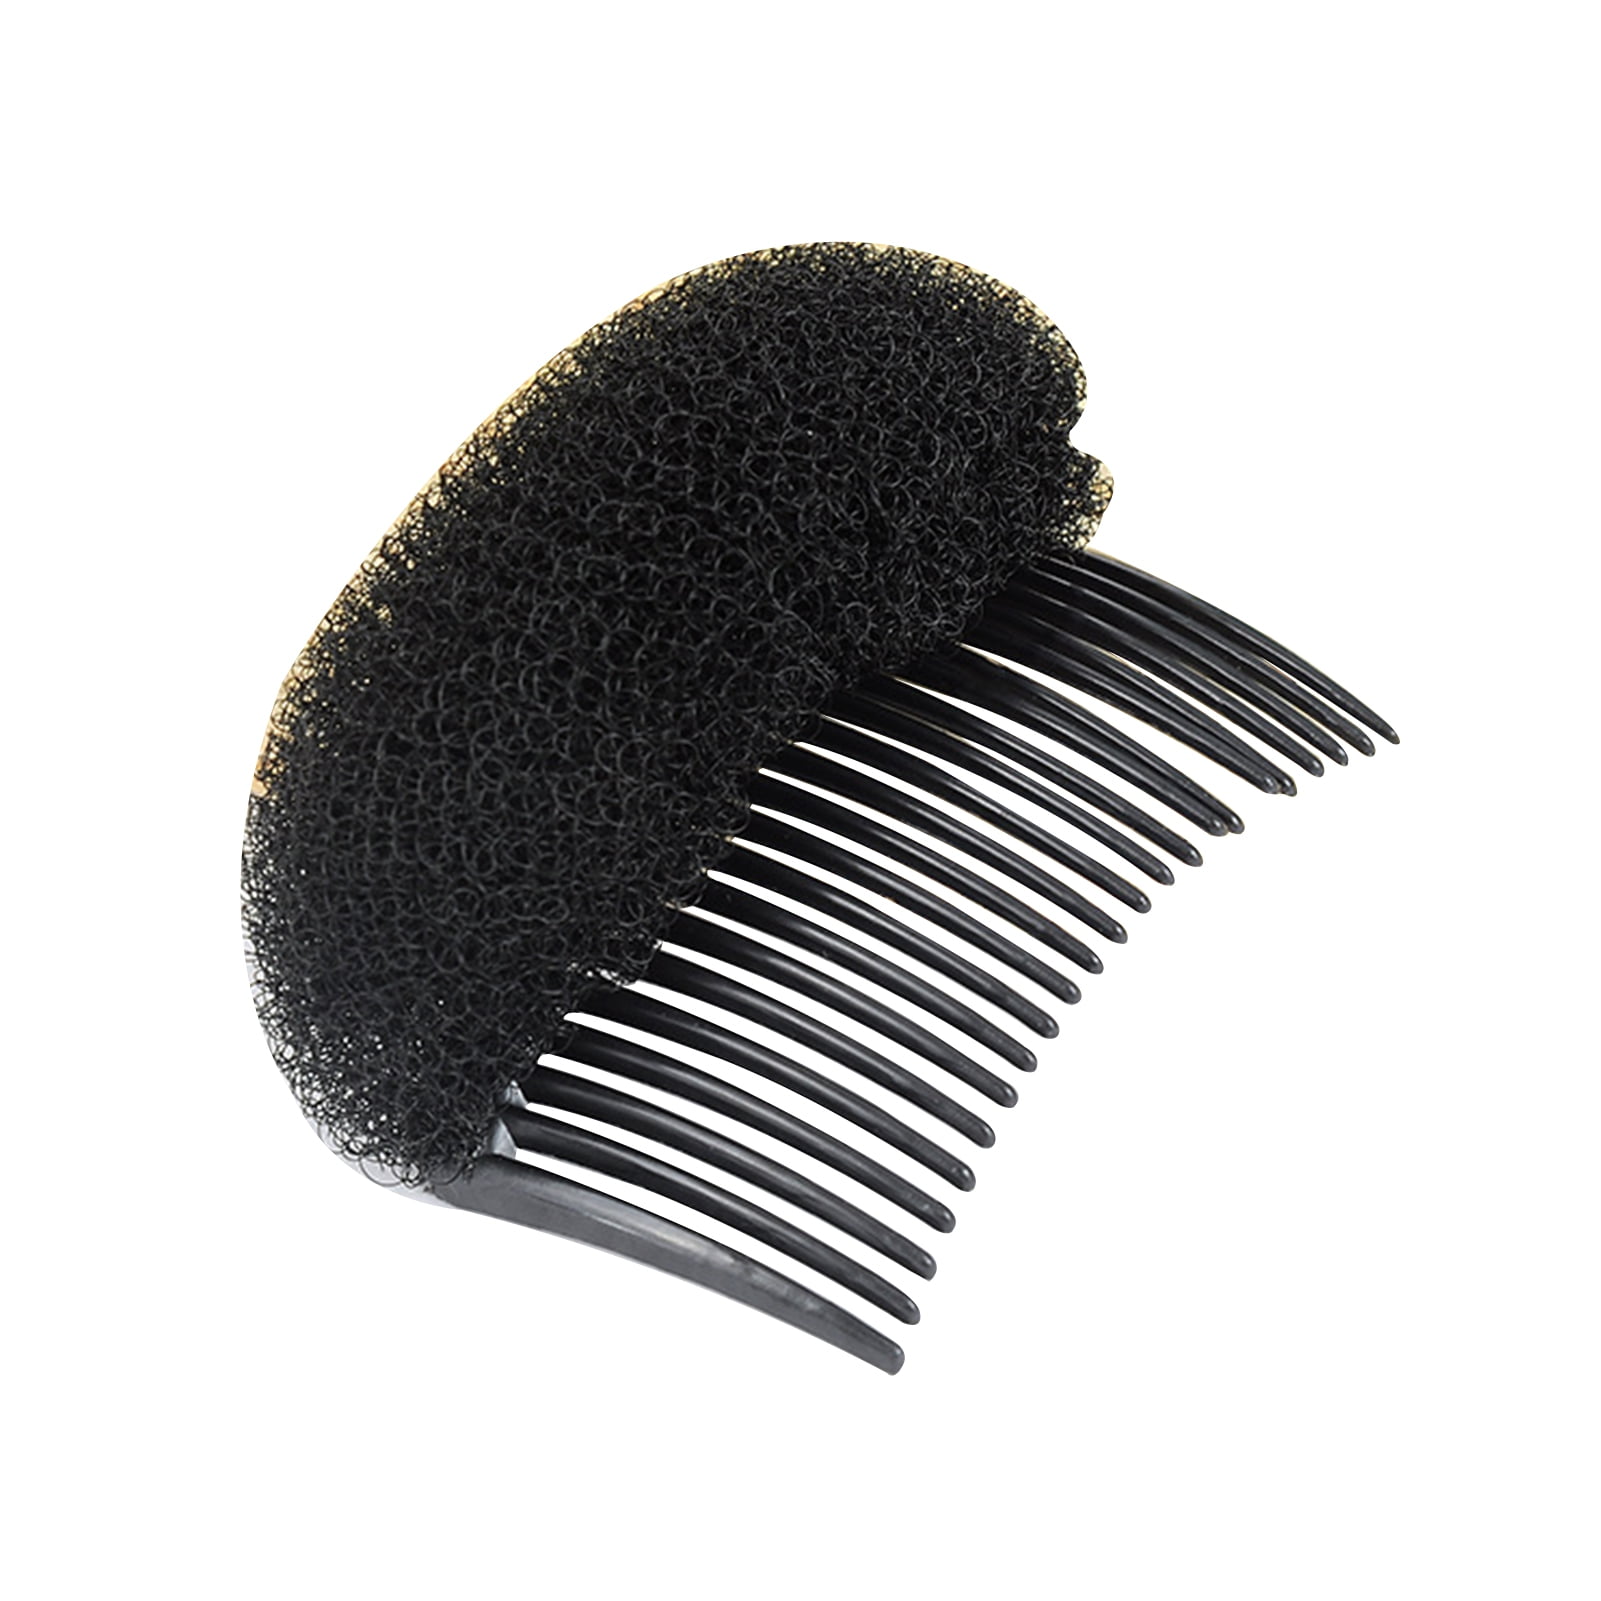 Puff Hair Cushion Comb Clip Fluffy Sponge Clip Lady Makeup Stereoscopic  Hairstyle Comb Insert Tool Hair Accessories For Women - AliExpress